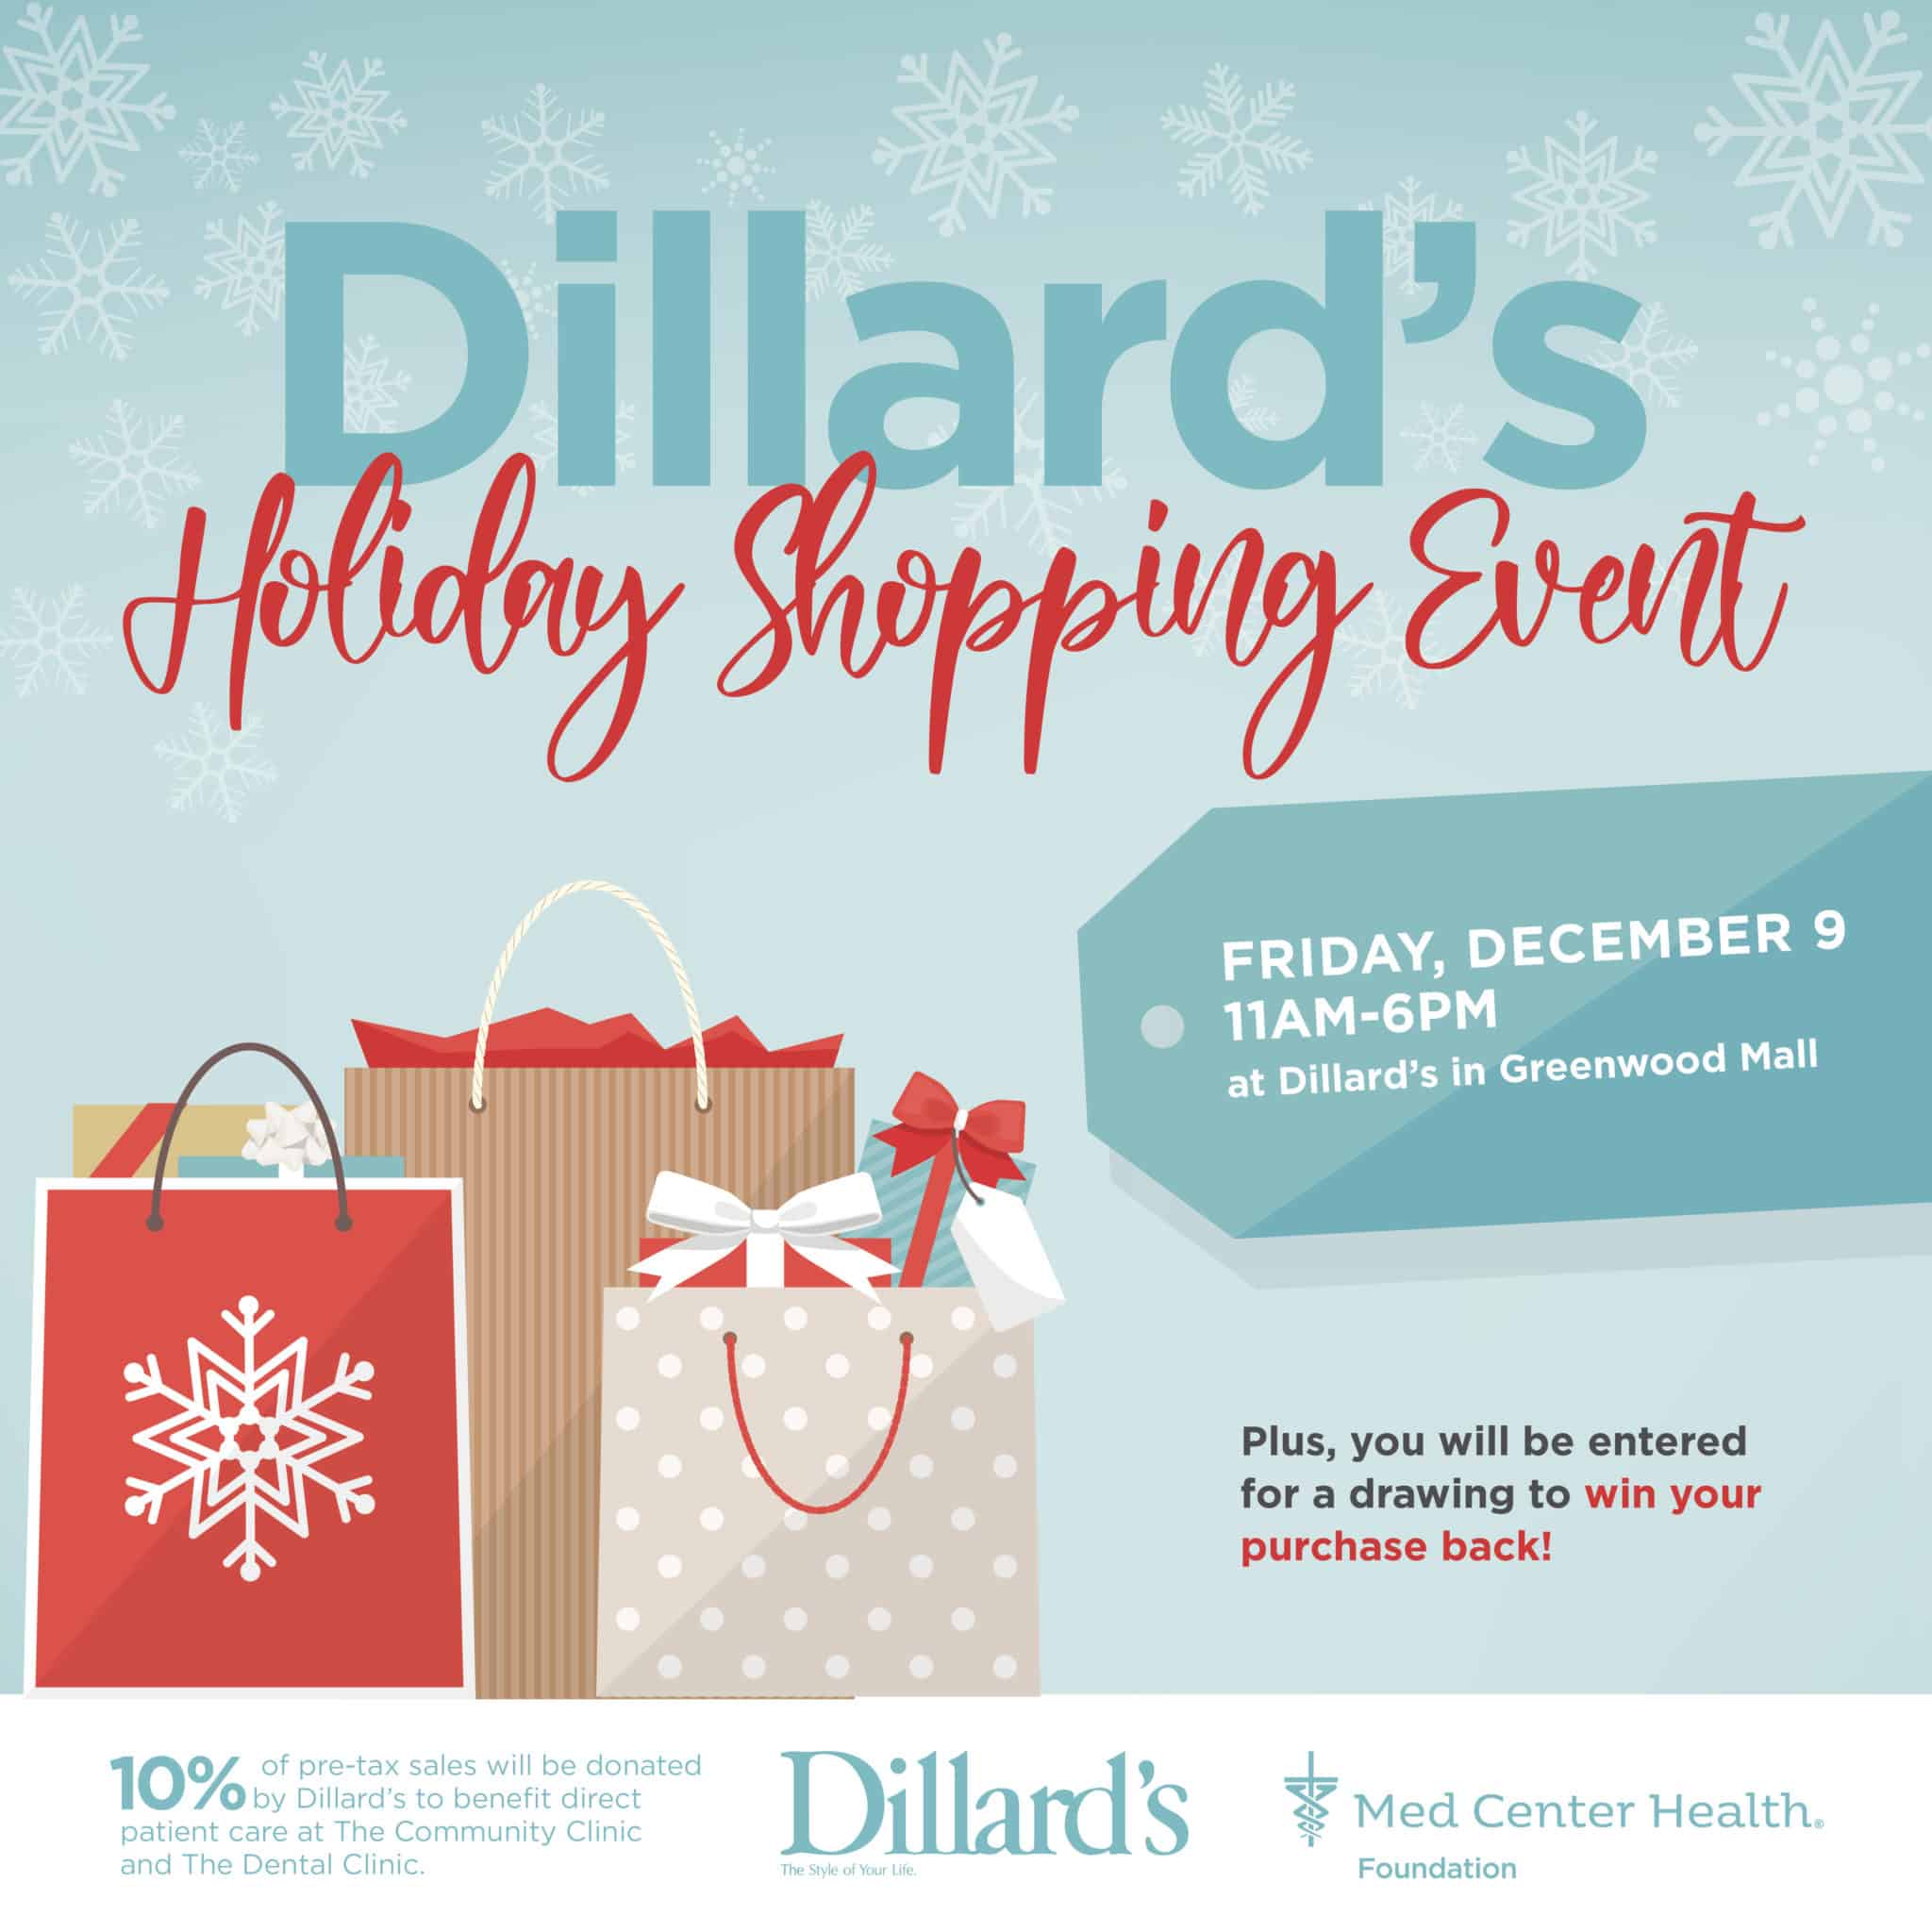 Dillard’s Holiday Gift Card & Shopping Event!